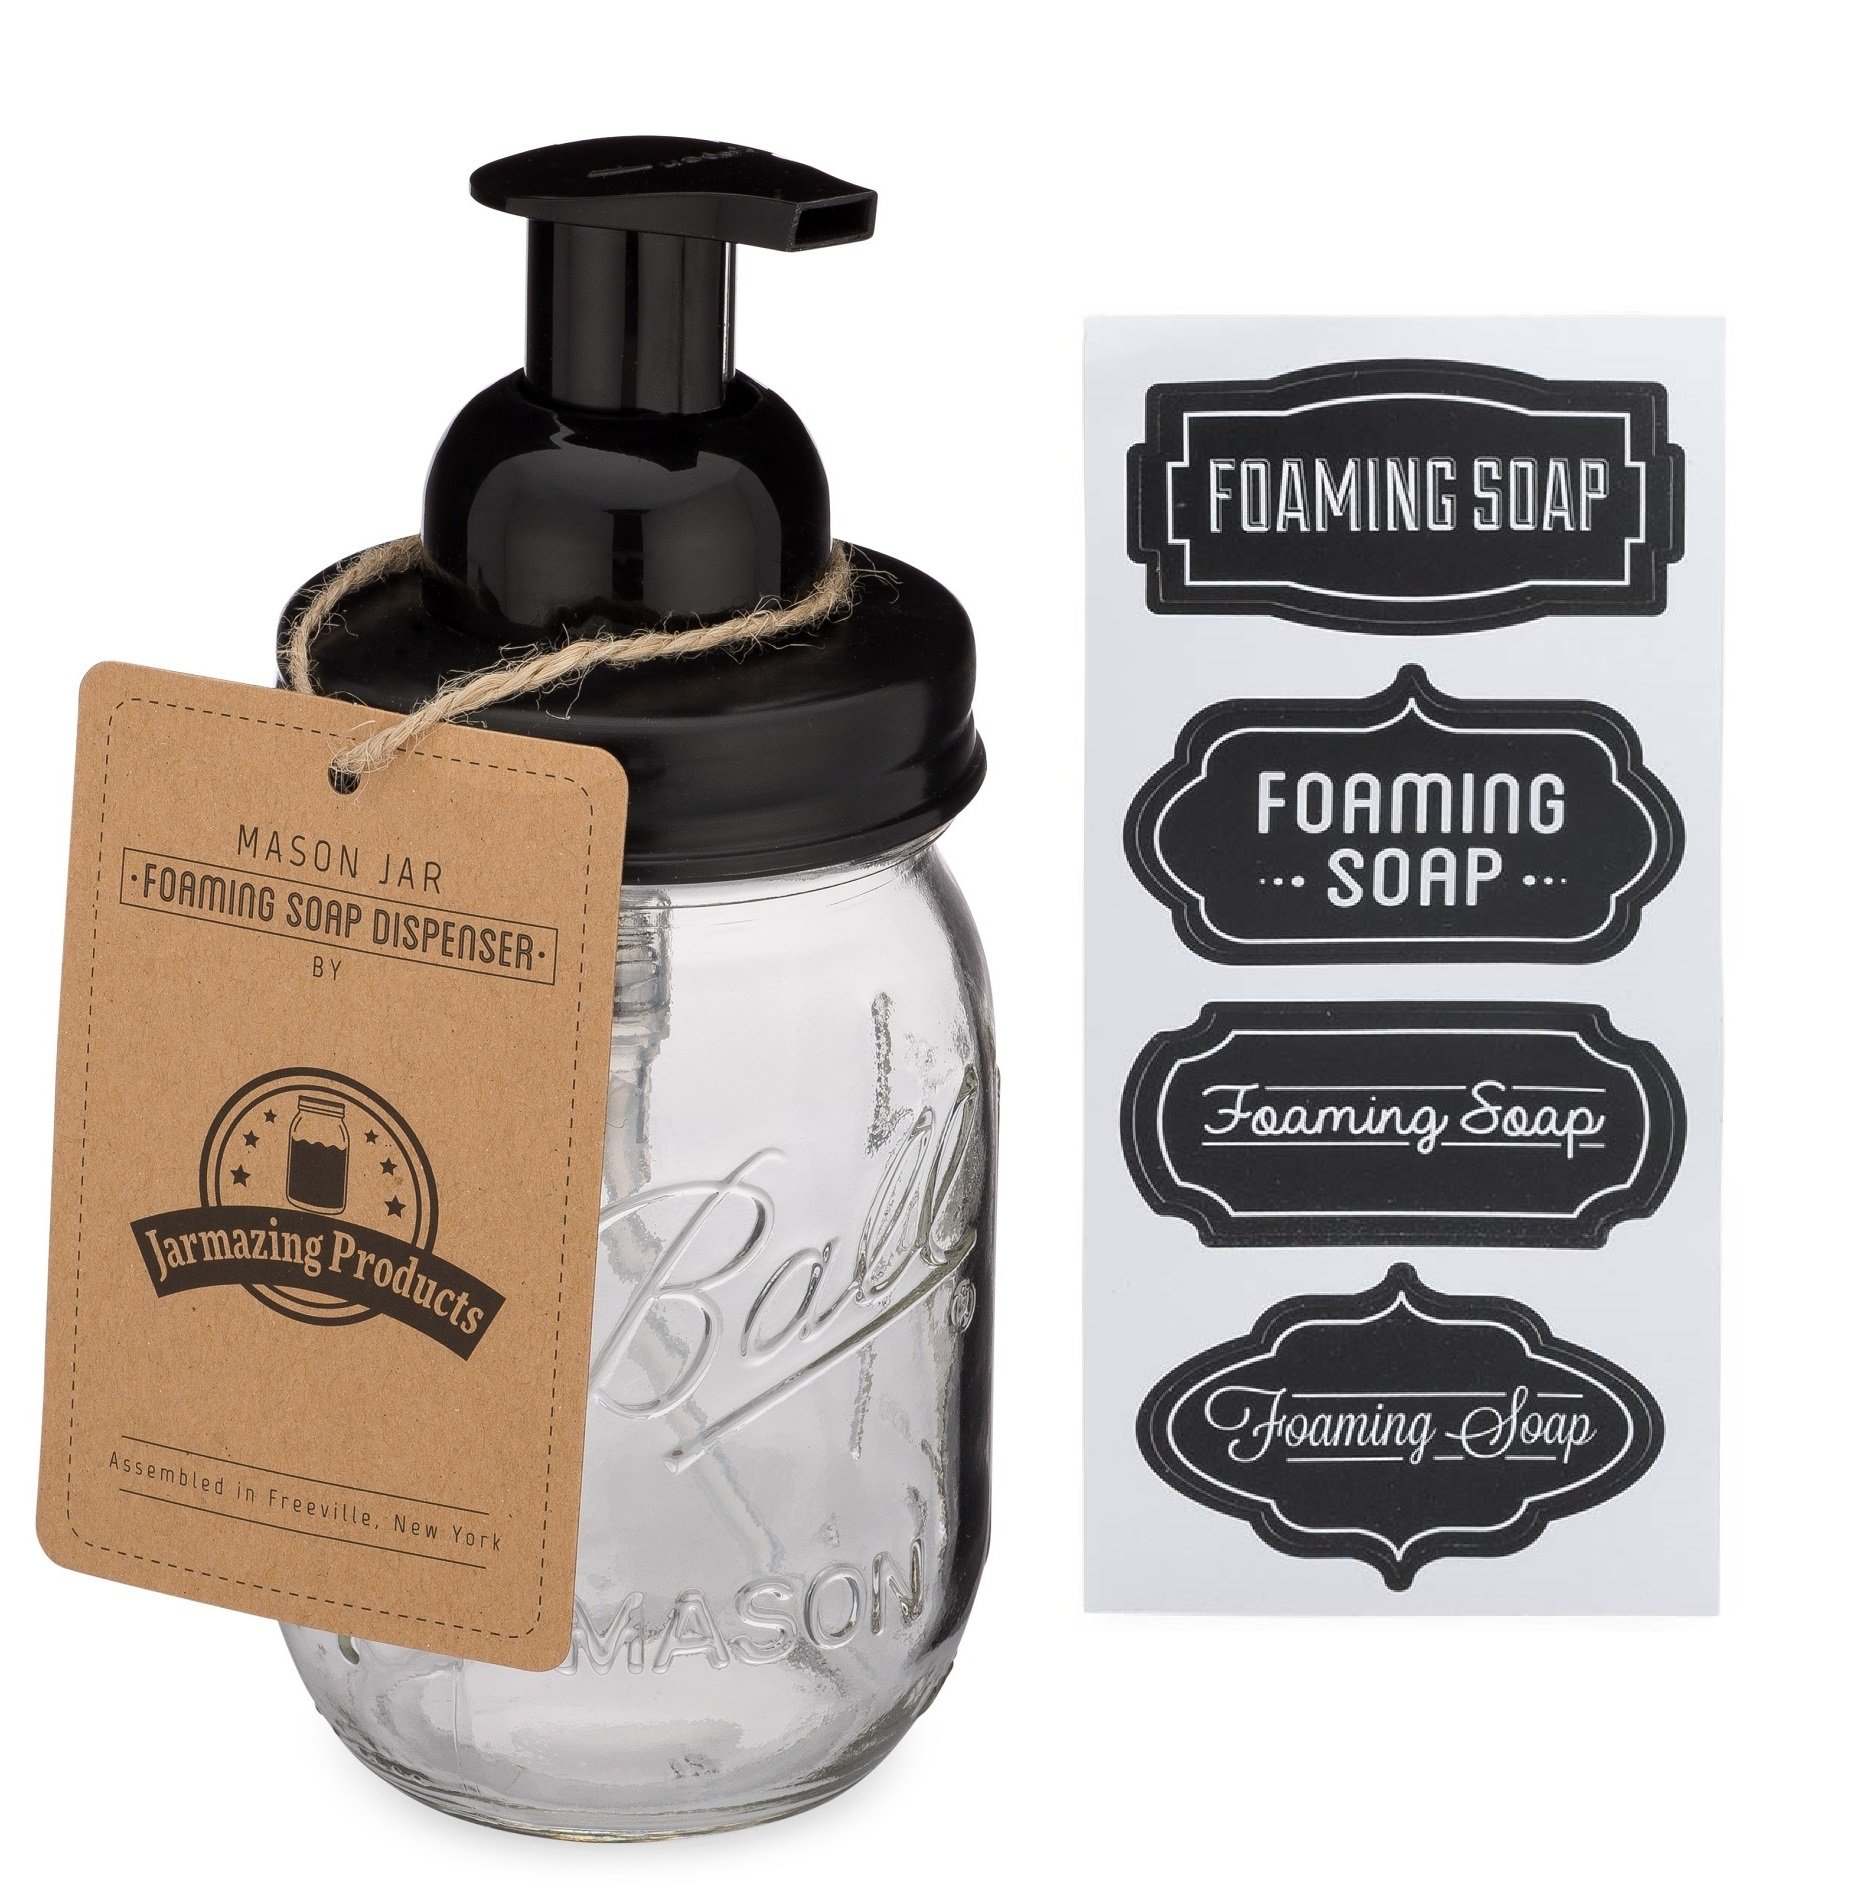 Book Cover Jarmazing Products Mason Jar Foaming Soap Dispenser - Black - with 16 Ounce Ball Mason Jar - One Pack!